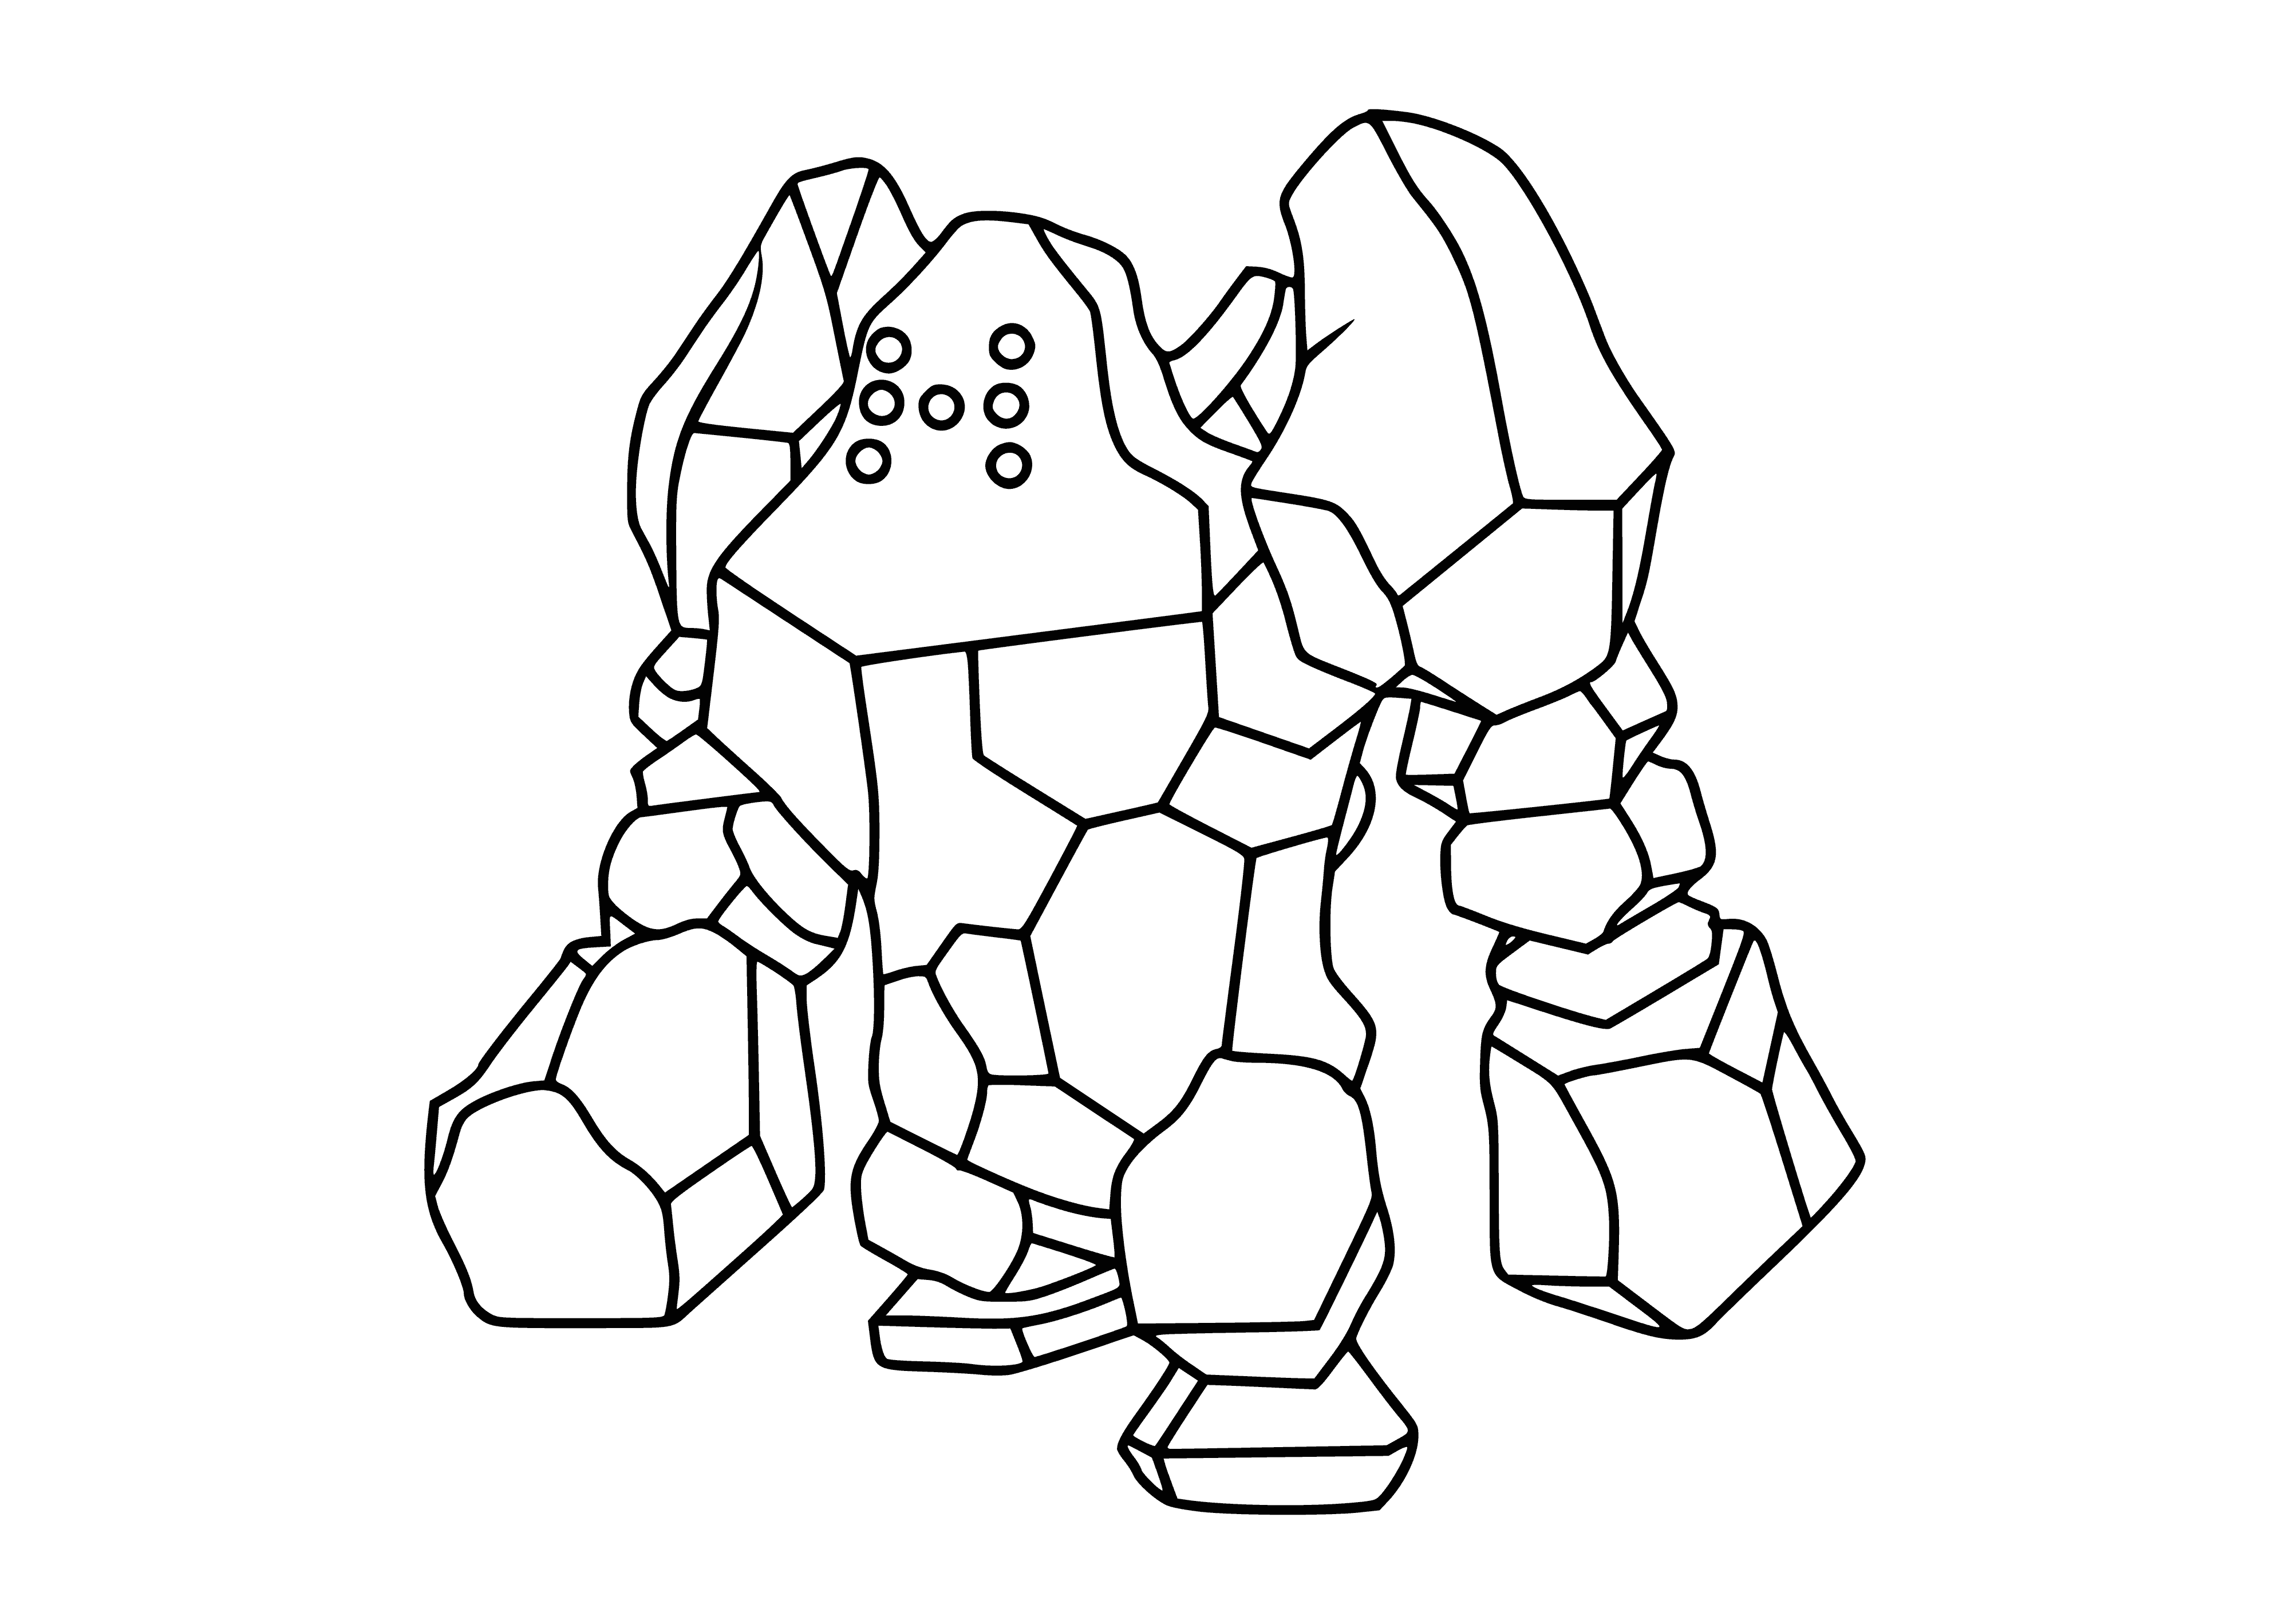 coloring page: Large, brown creature w/t-shaped head, red eyes, thick muscular arms/legs, & 2 large grey boulders on back.